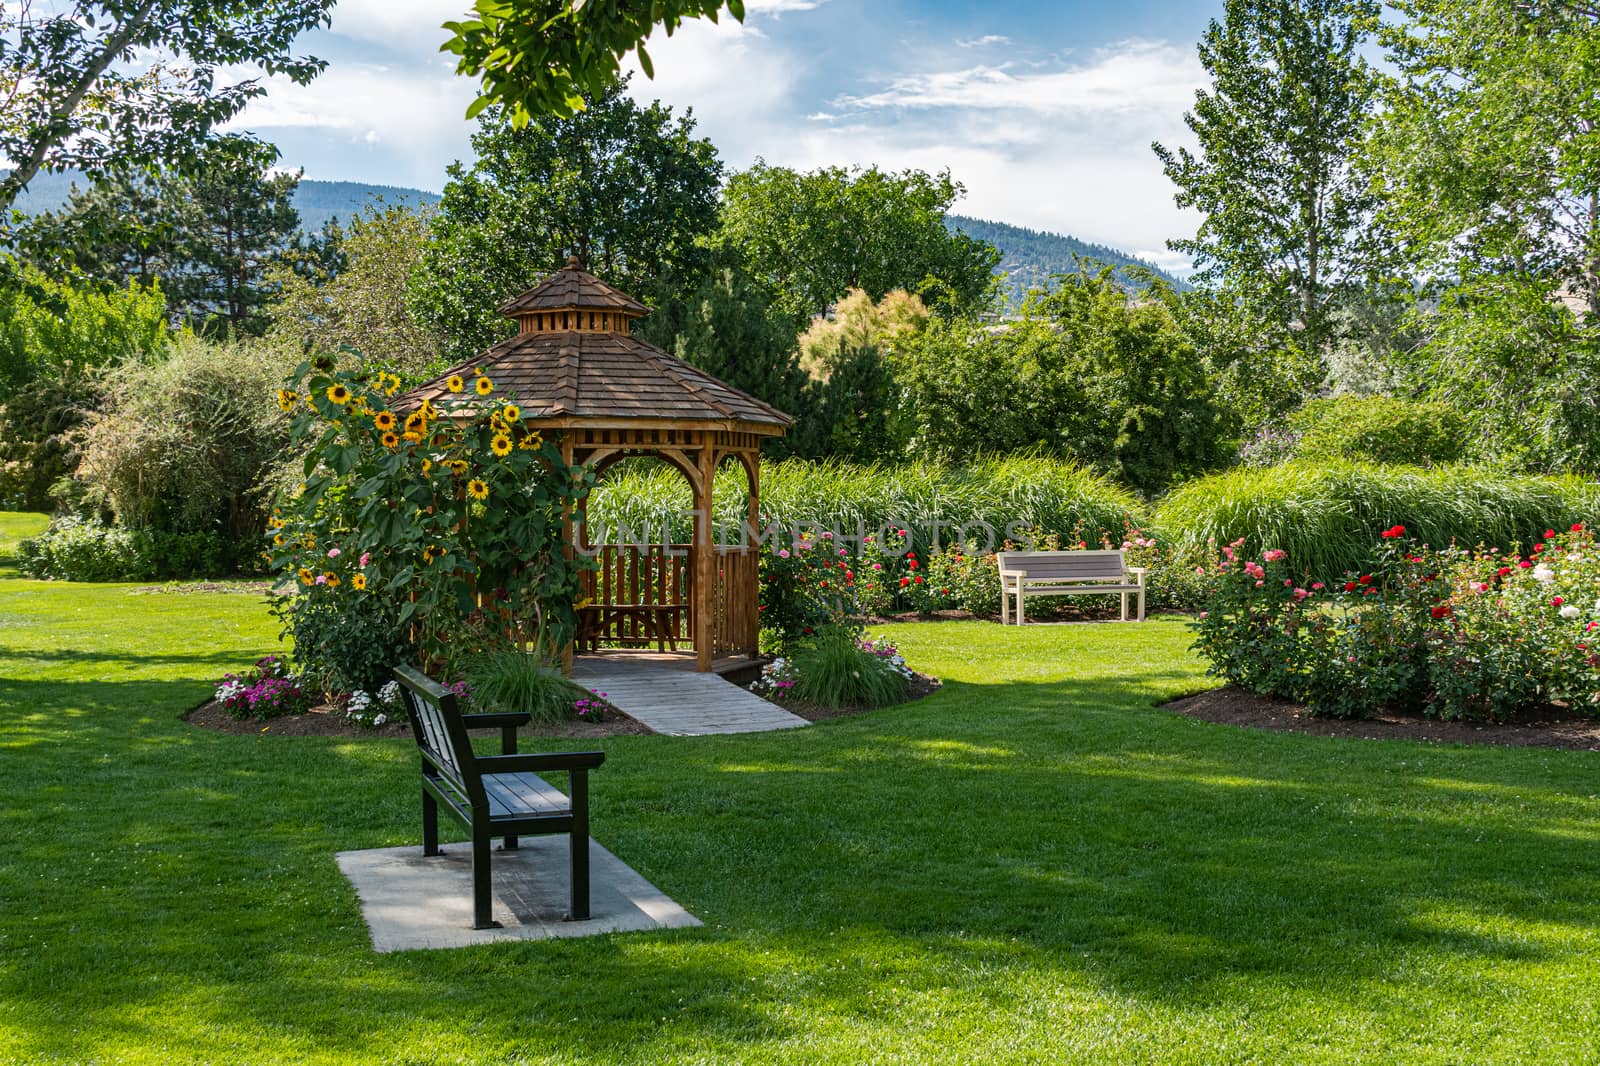 Recreation area with benches and wooden gazebo under blossoming sunflowers by Imagenet